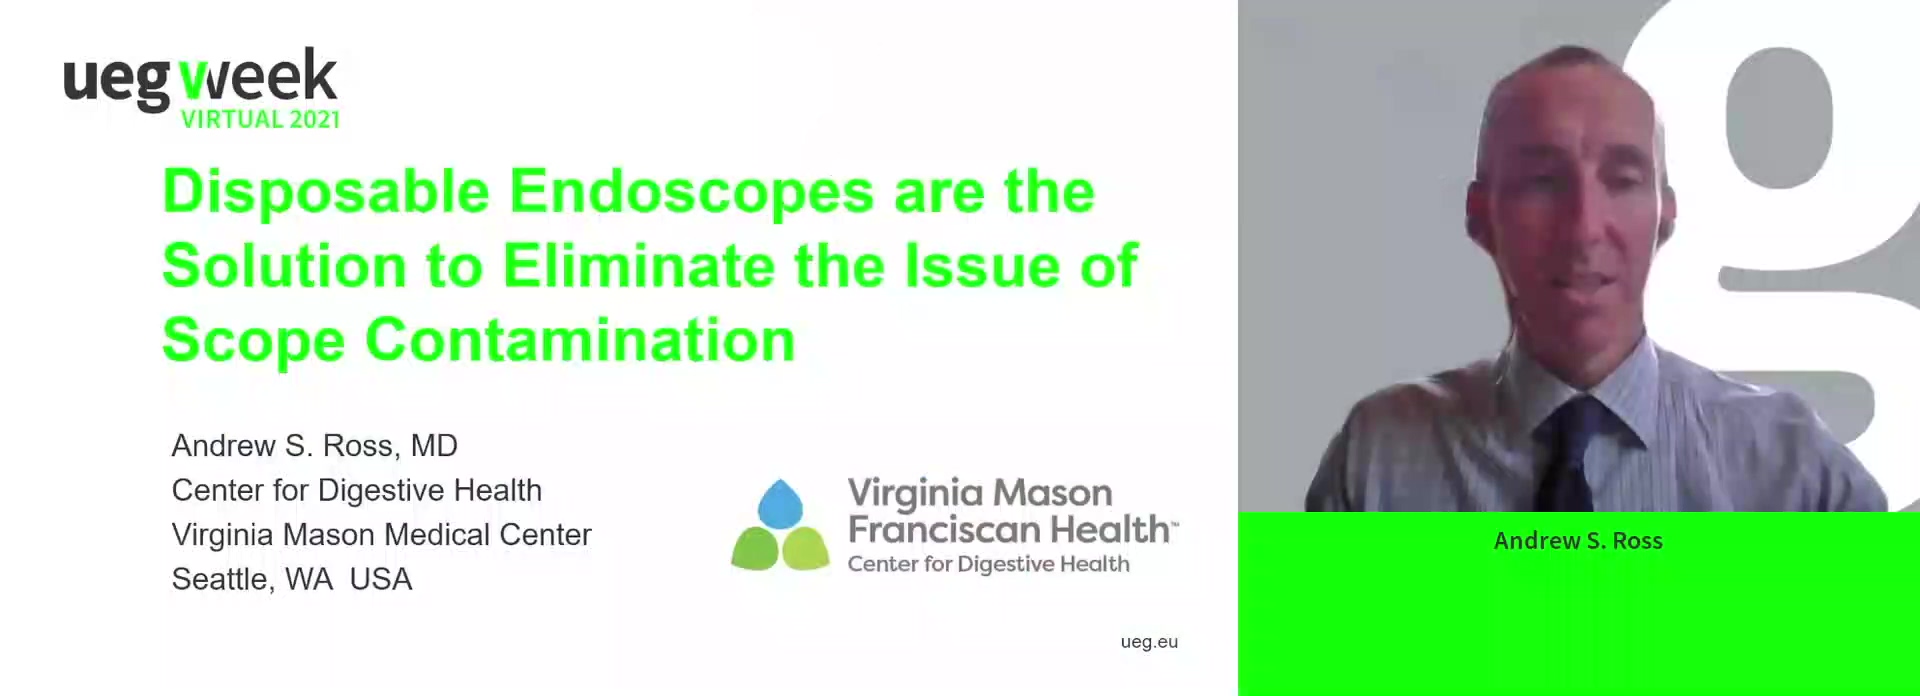 Disposable endoscopes are the solution to eliminate the issue of scope contamination